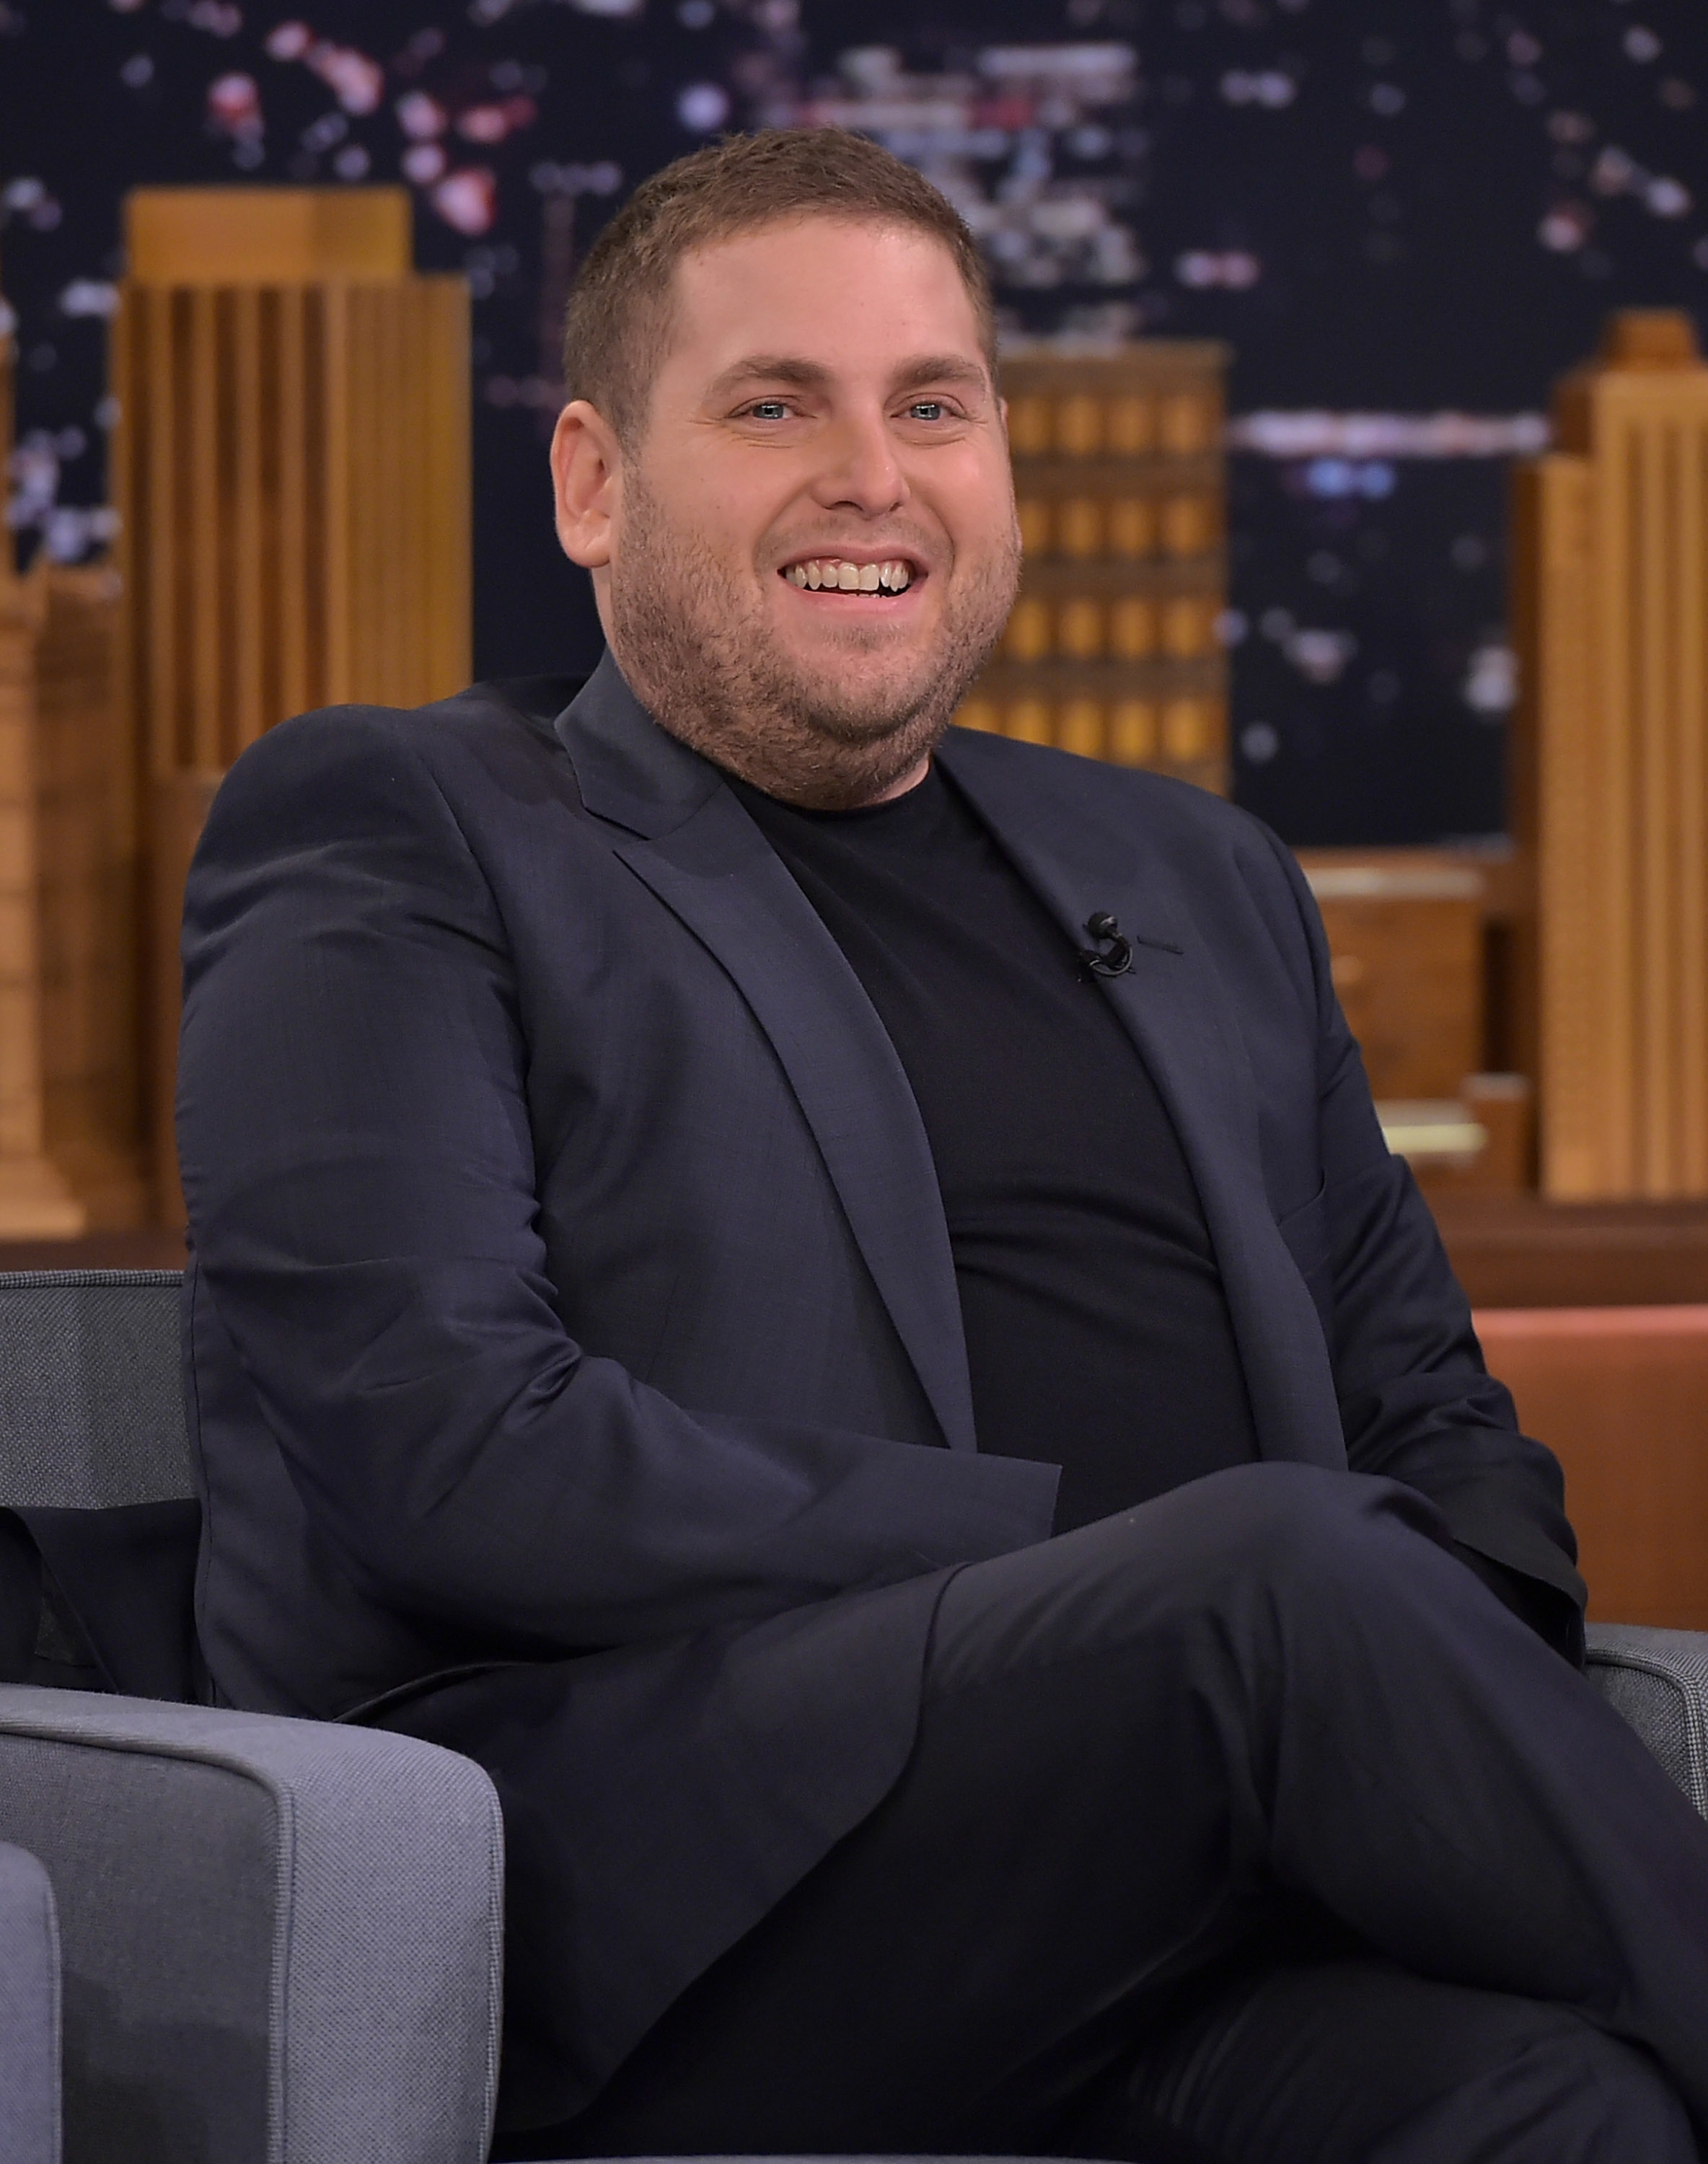 Jonah Hill sits smiling in a suit on a talk show set